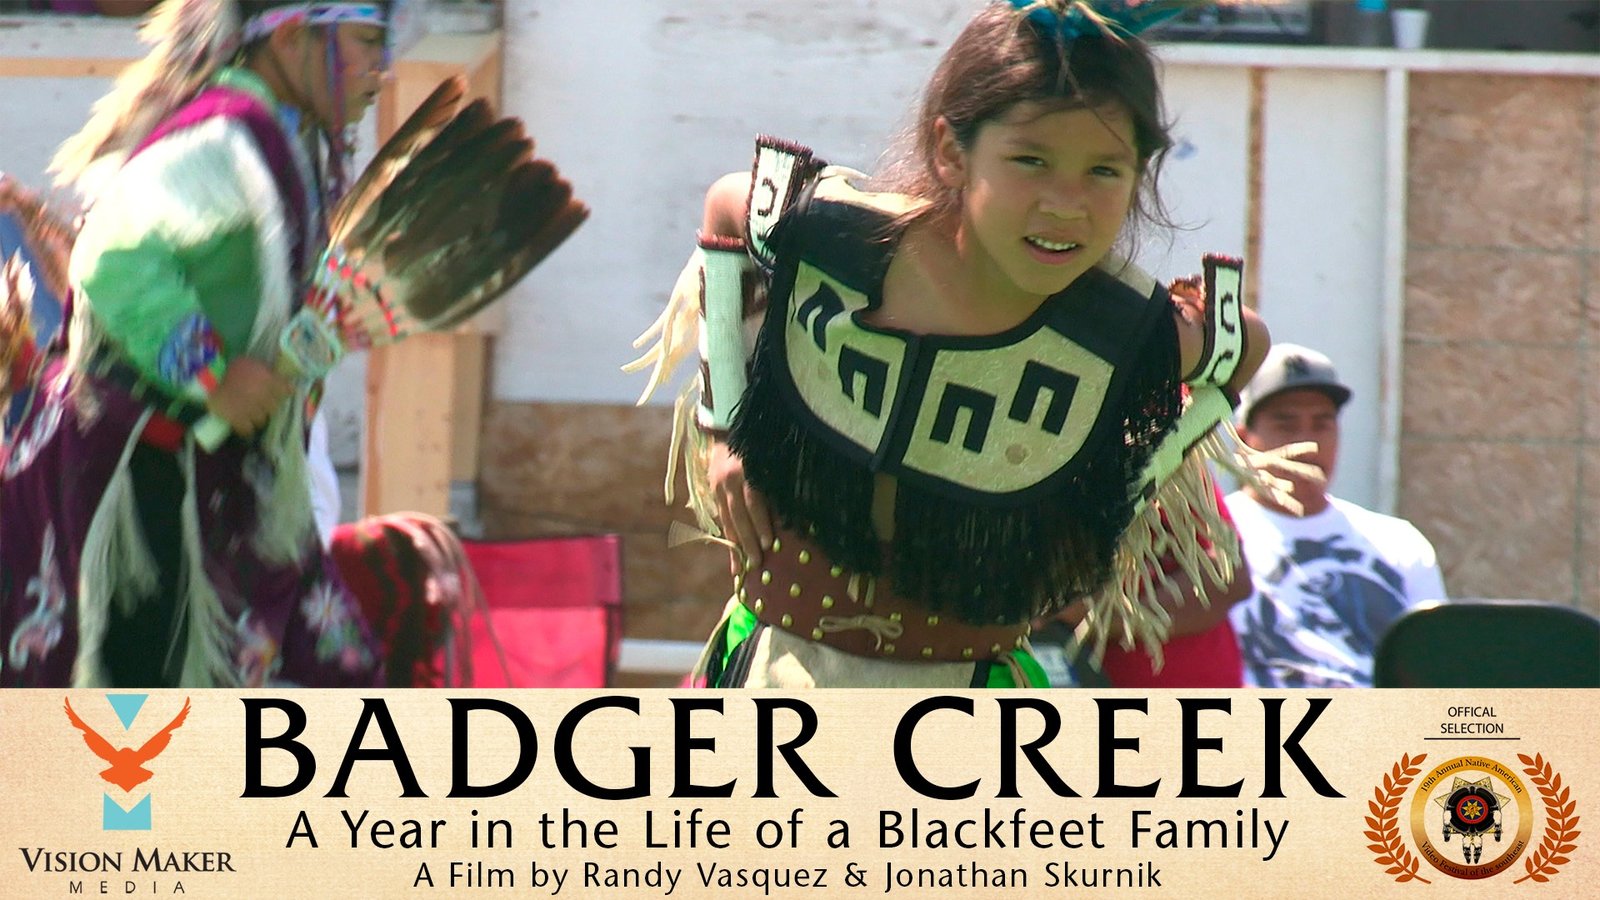 Badger Creek - A Portrait of Native Resilience on the Blackfeet Reservation